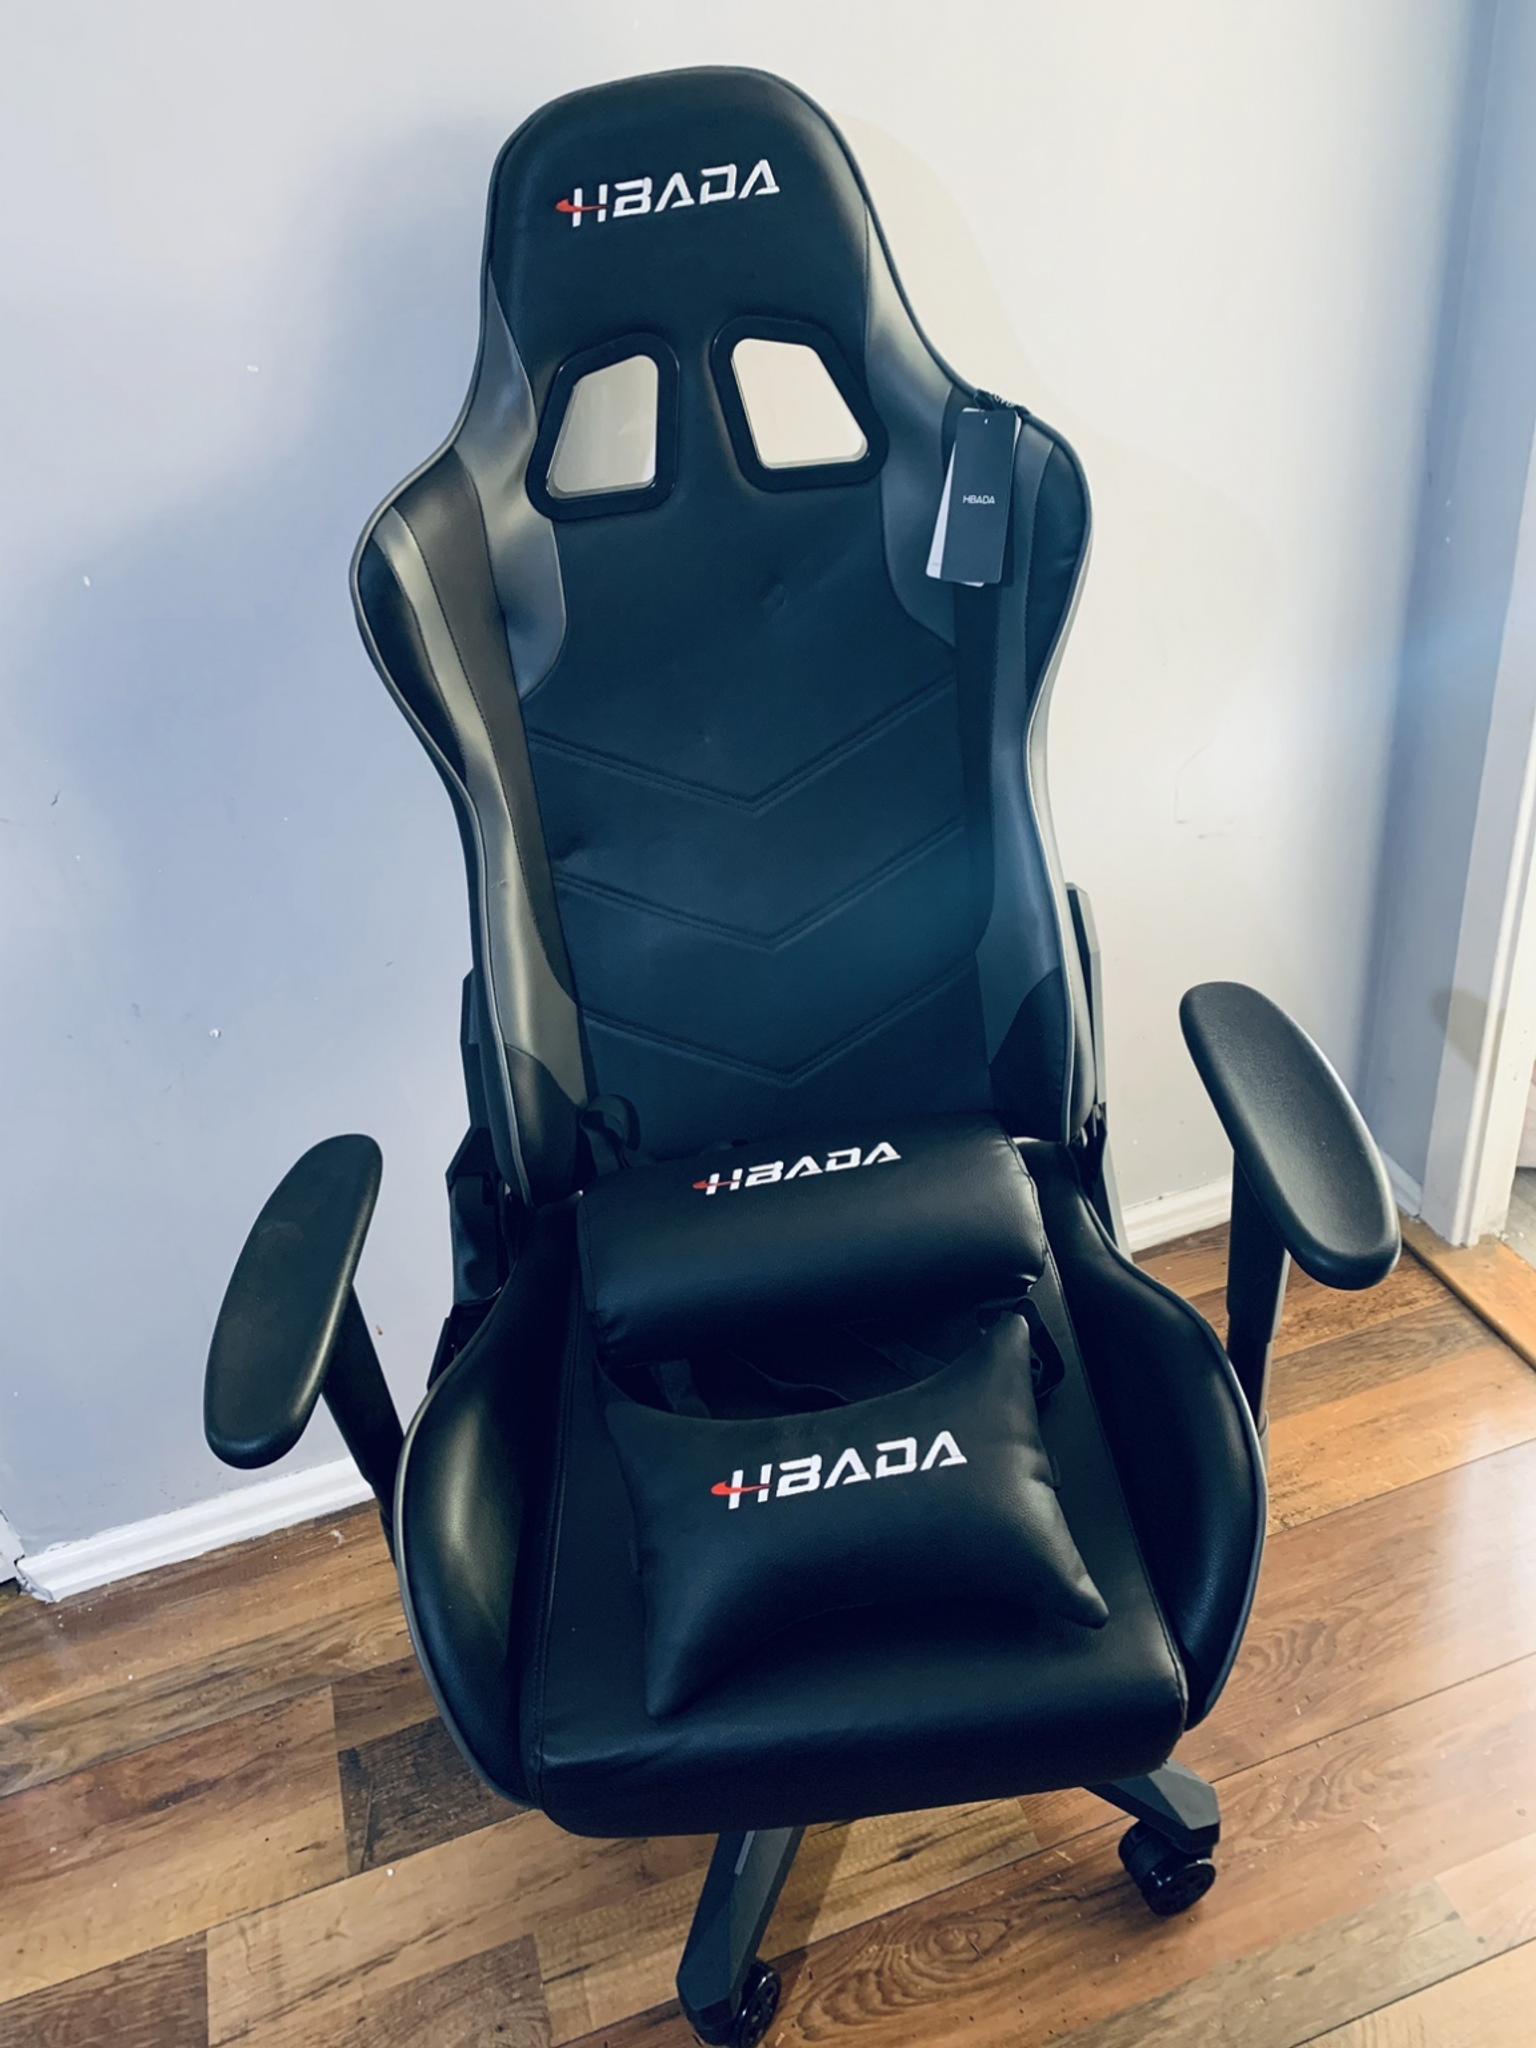 Hbada gaming chair in WV6 Wolverhampton for £120.00 for